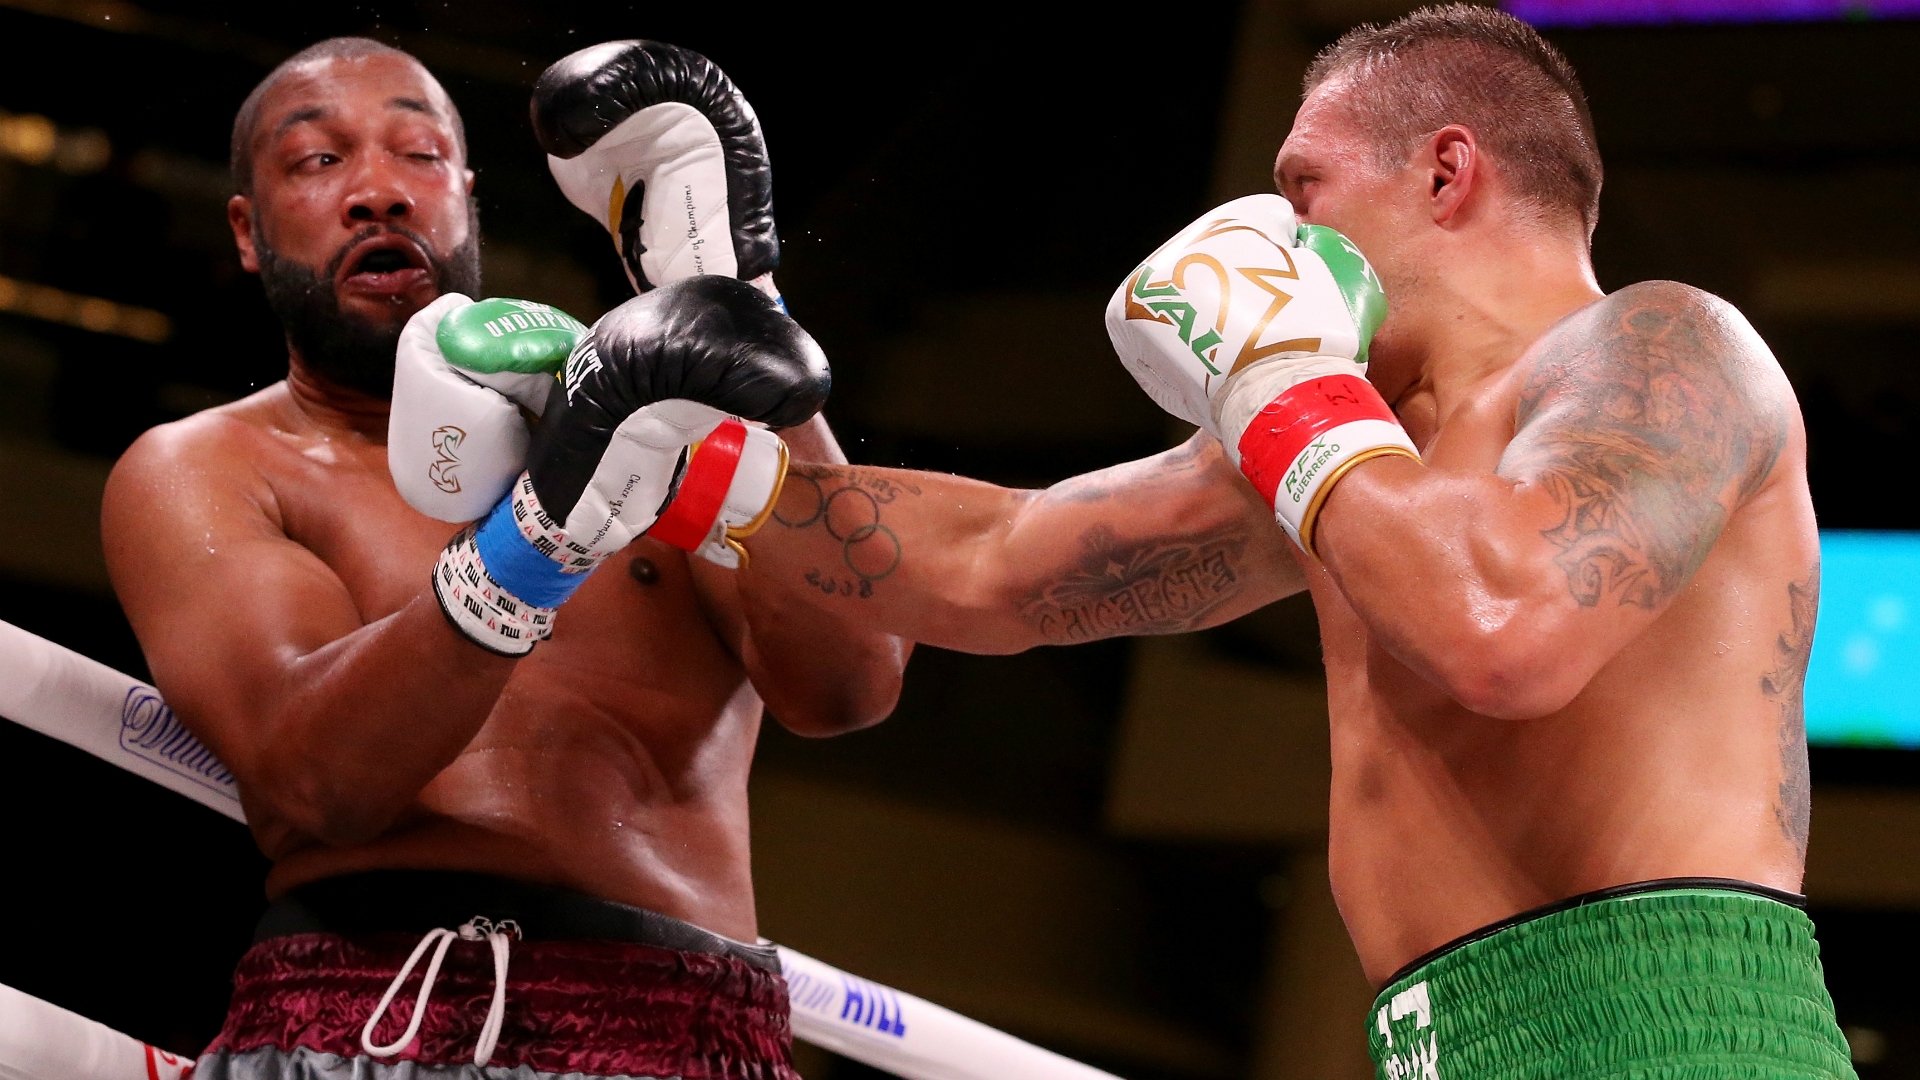 Oleksandr Usyk makes successful heavyweight debut with TKO